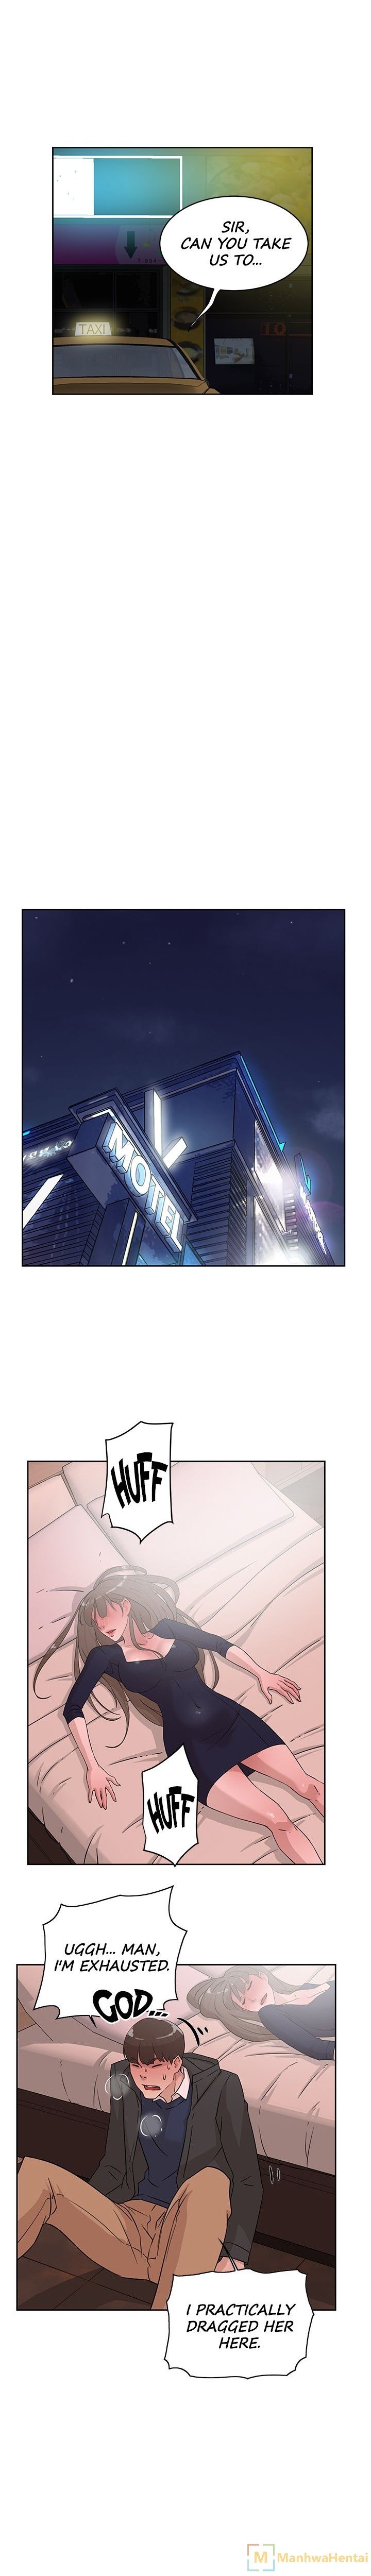 office-affairs-chap-31-10